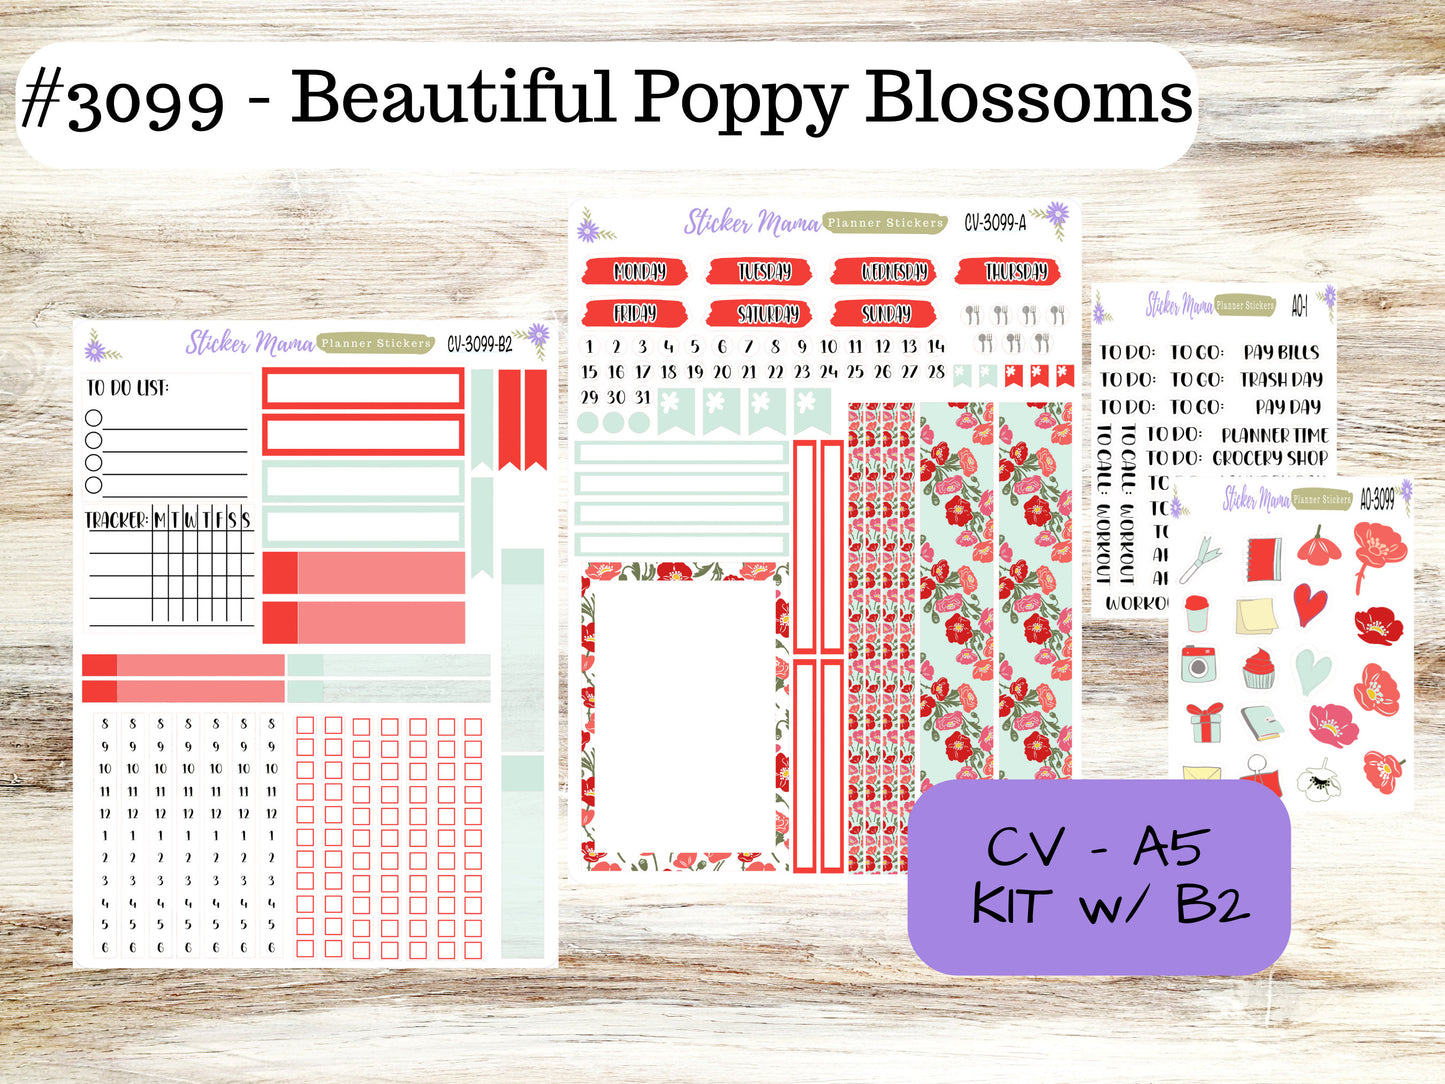 A5 COMPACT VERTICAL-Kit #3099 || Beautiful Poppy Blossoms  - Compact Vertical - Planner Stickers - Erin Condren Compact Vertical Weekly Kit